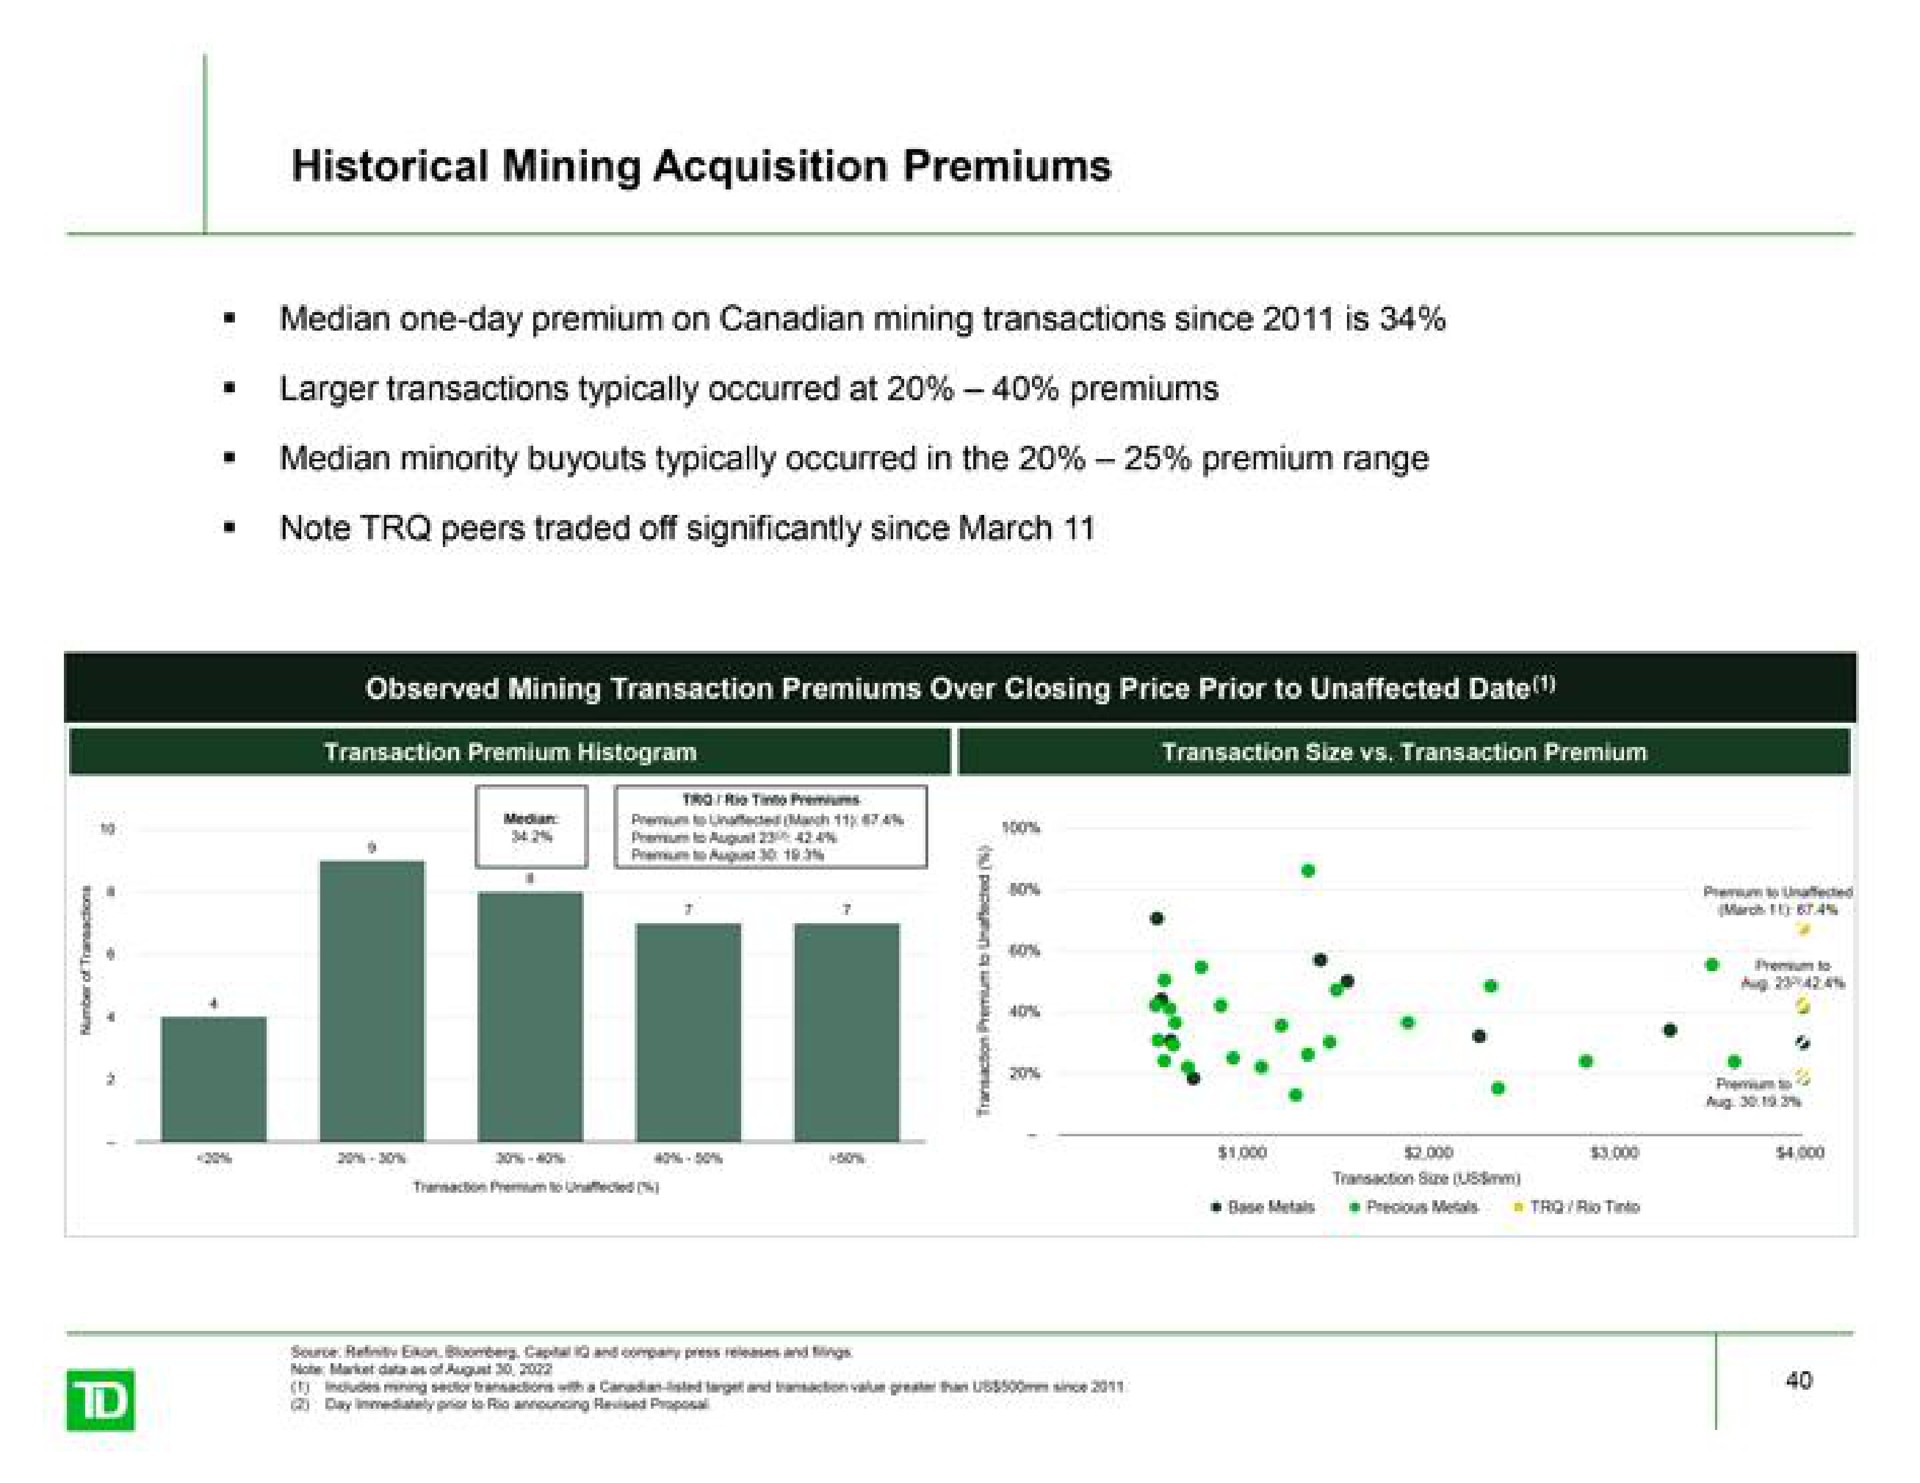 historical mining acquisition premiums | TD Securities